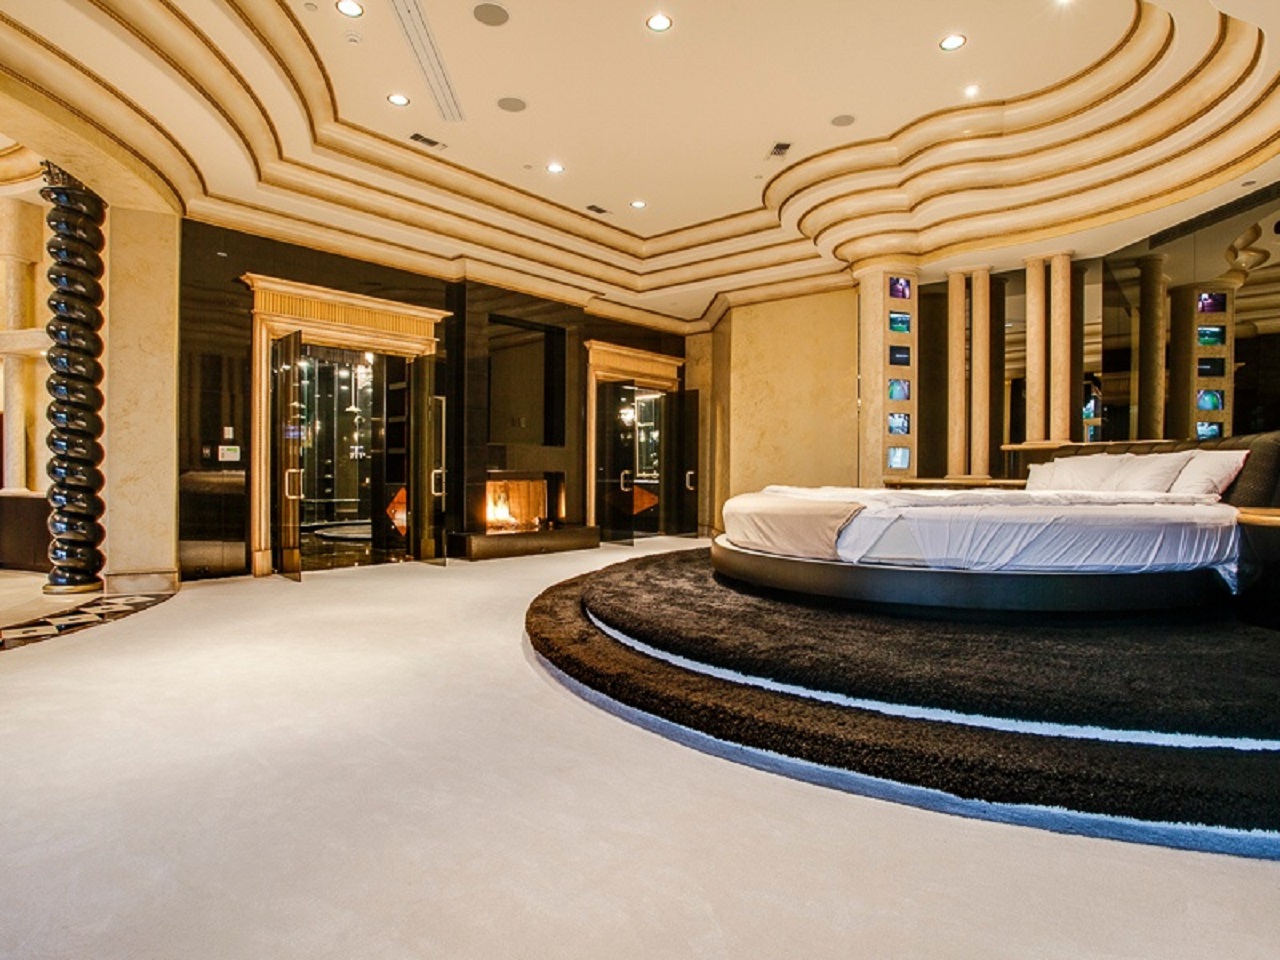 15 Luxurious Master Bedrooms With Round Beds - Interior Design Inspirations